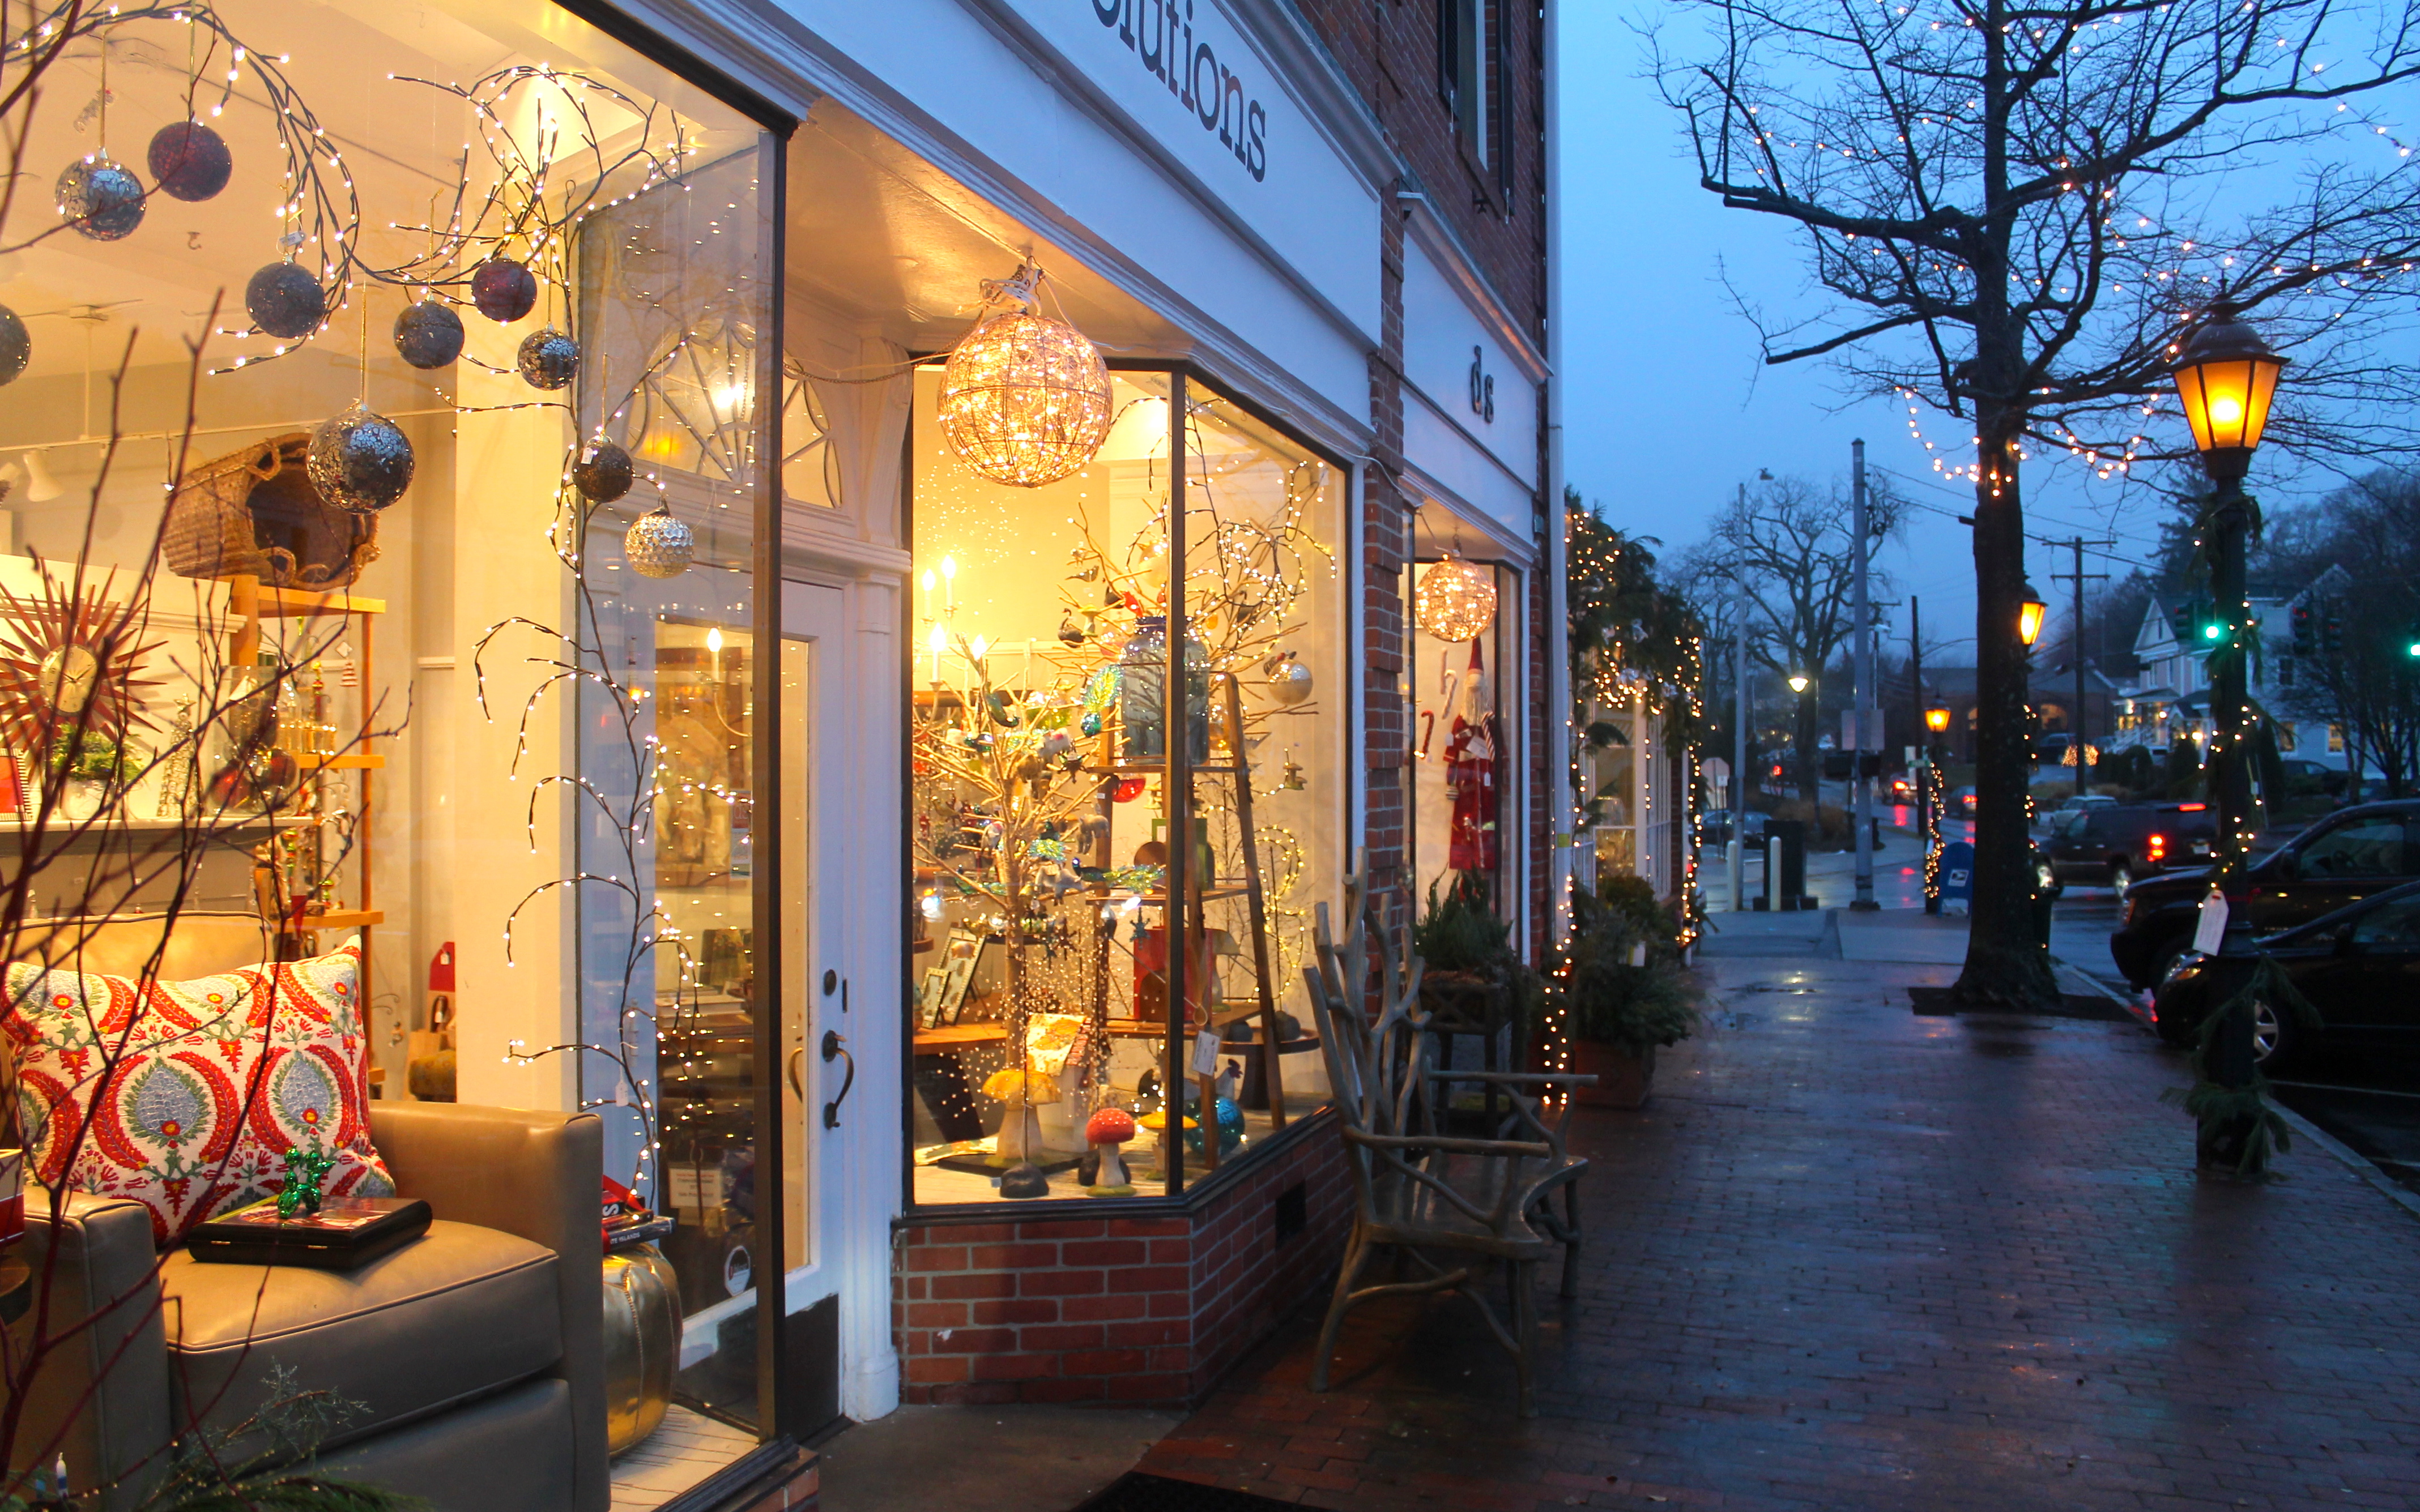 Christmas in a New England town | Most Lovely Things